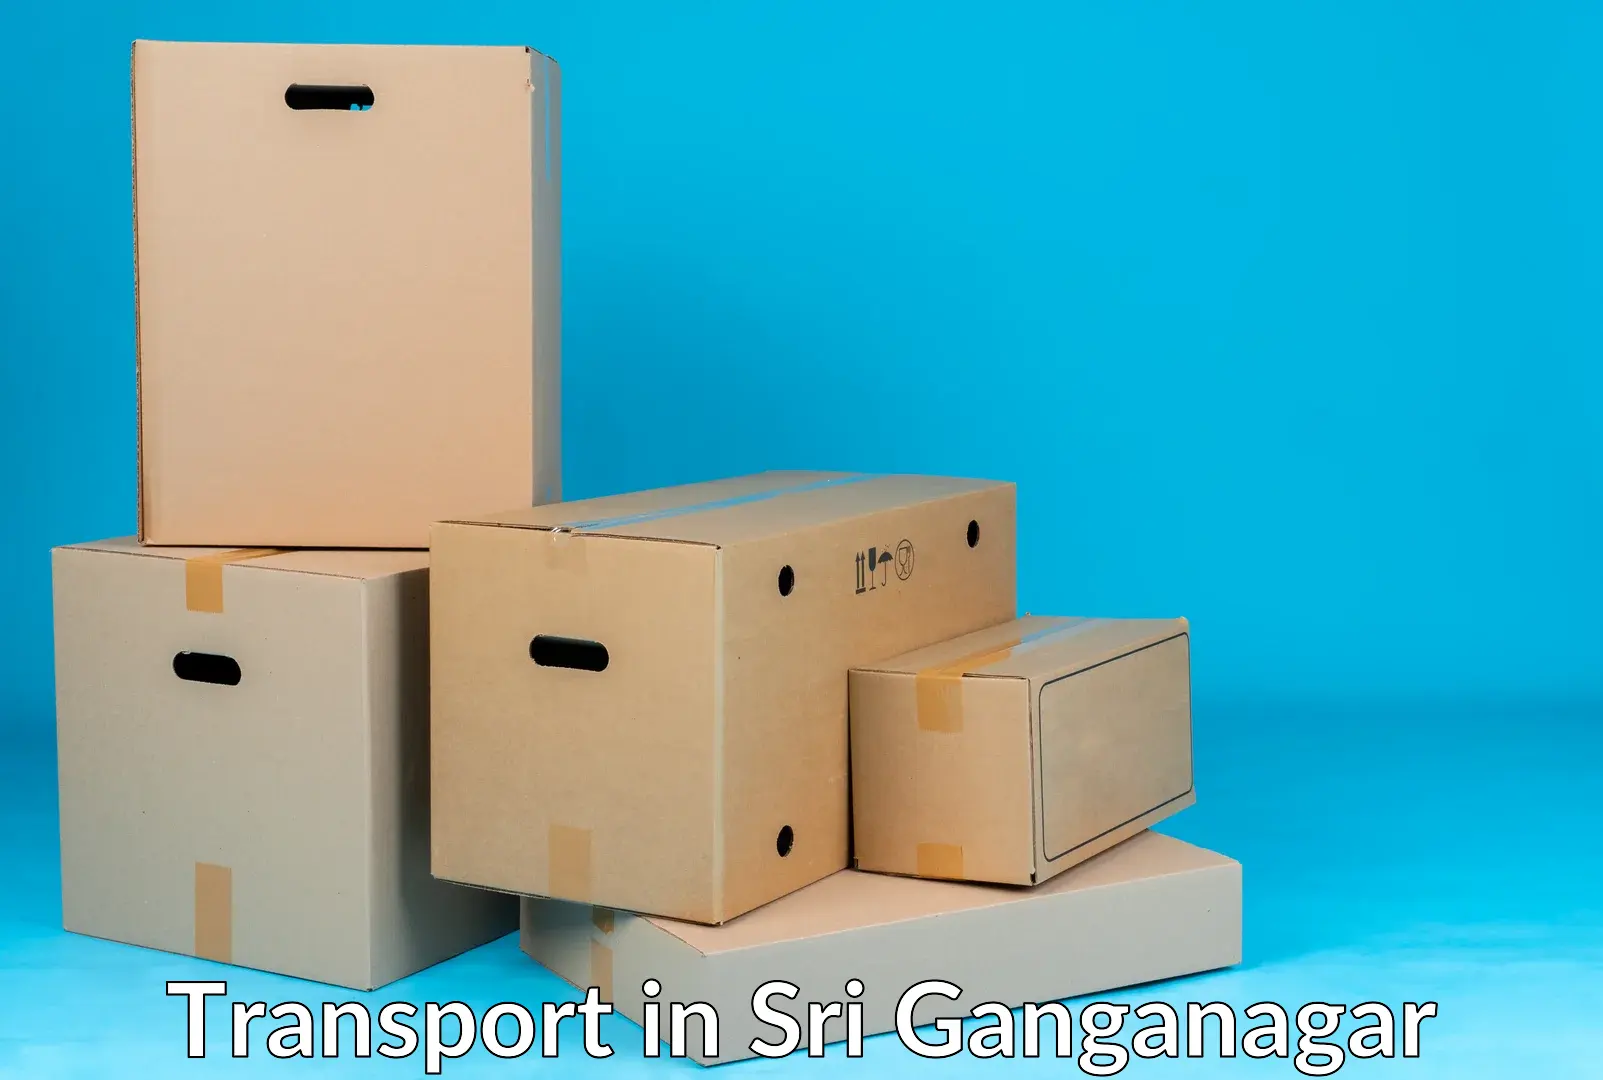 Package delivery services in Sri Ganganagar